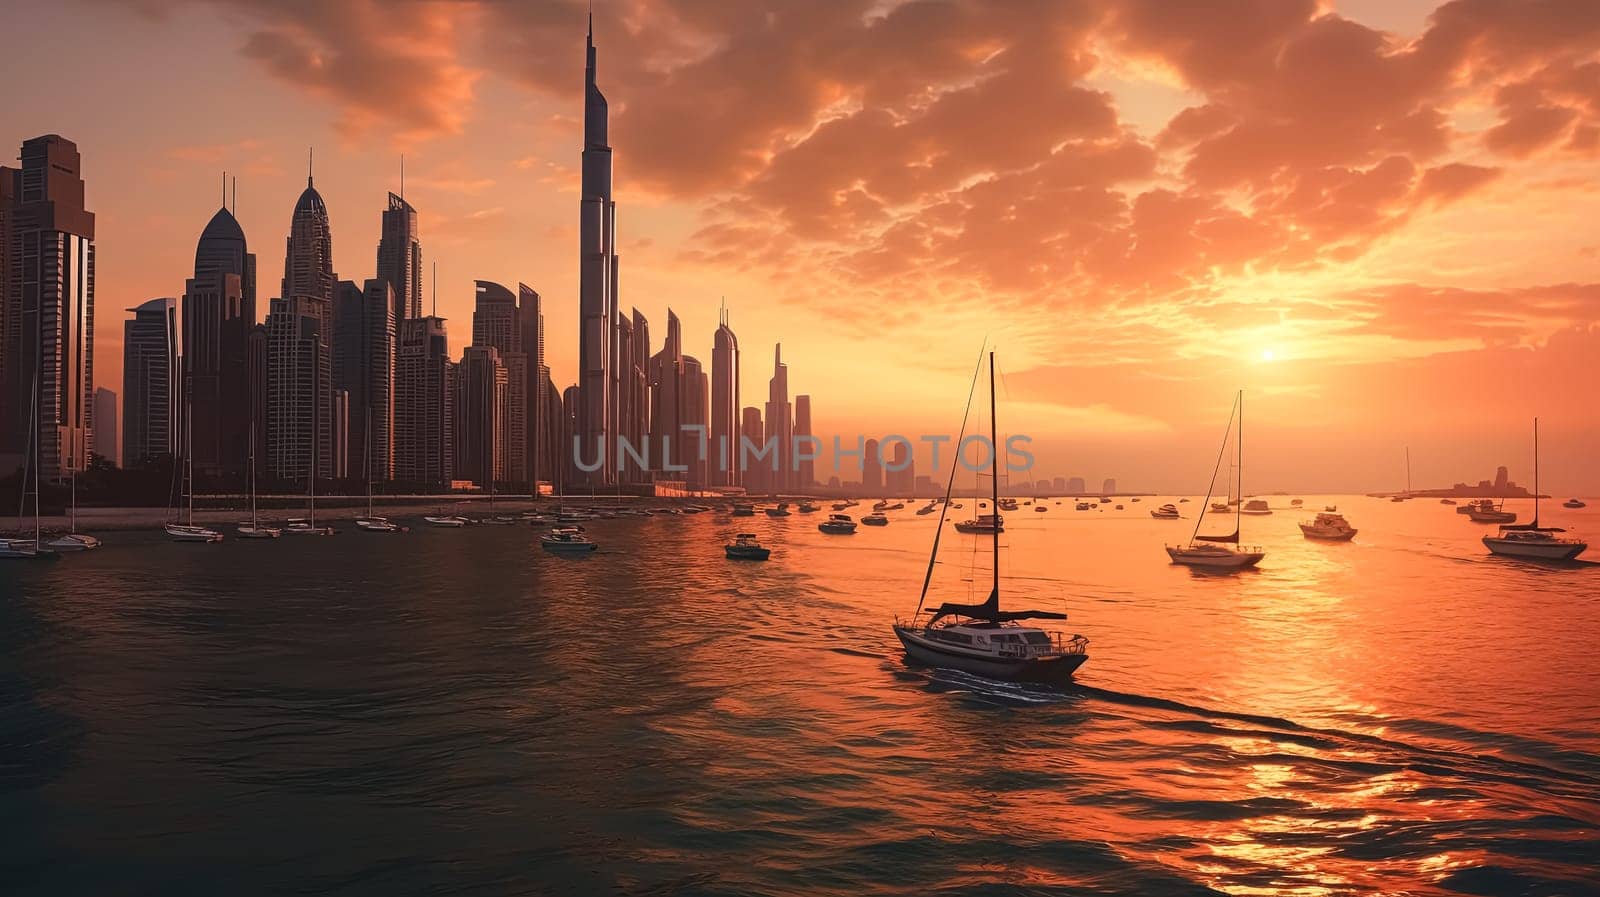 A boat is sailing in the ocean near a city skyline. The sky is orange and the sun is setting